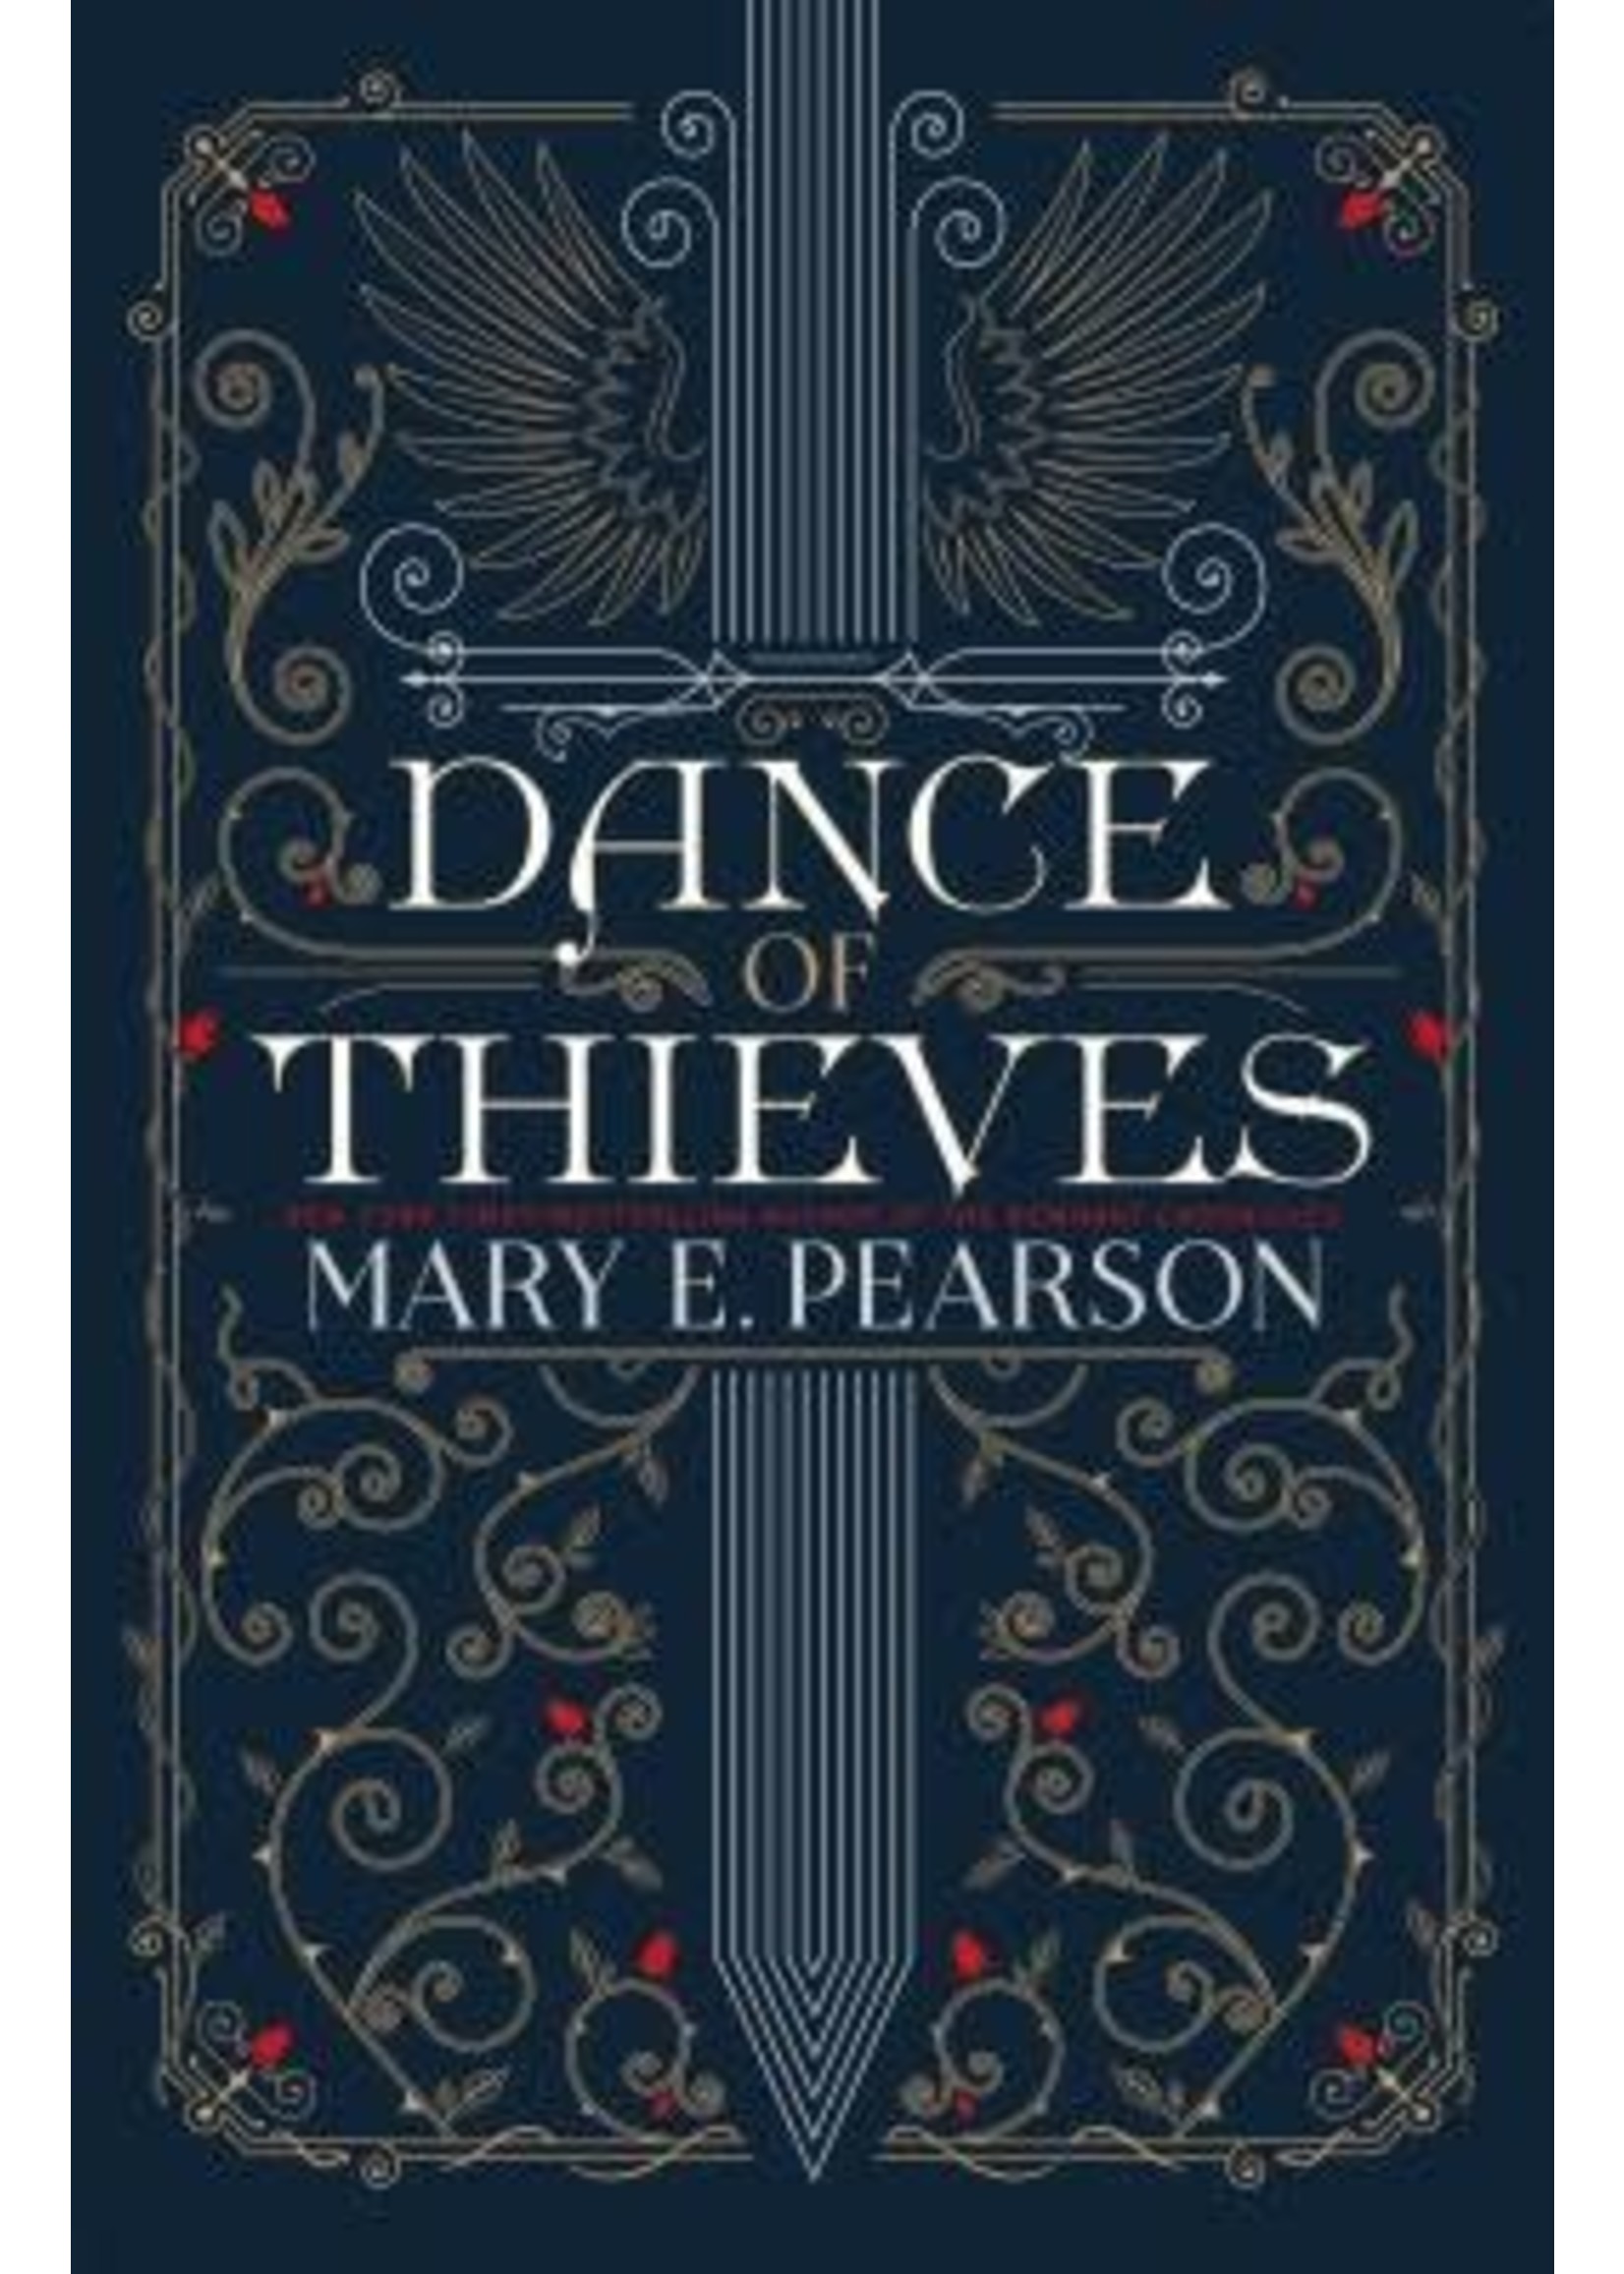 Dance of Thieves (Dance of Thieves #1) by Mary E. Pearson